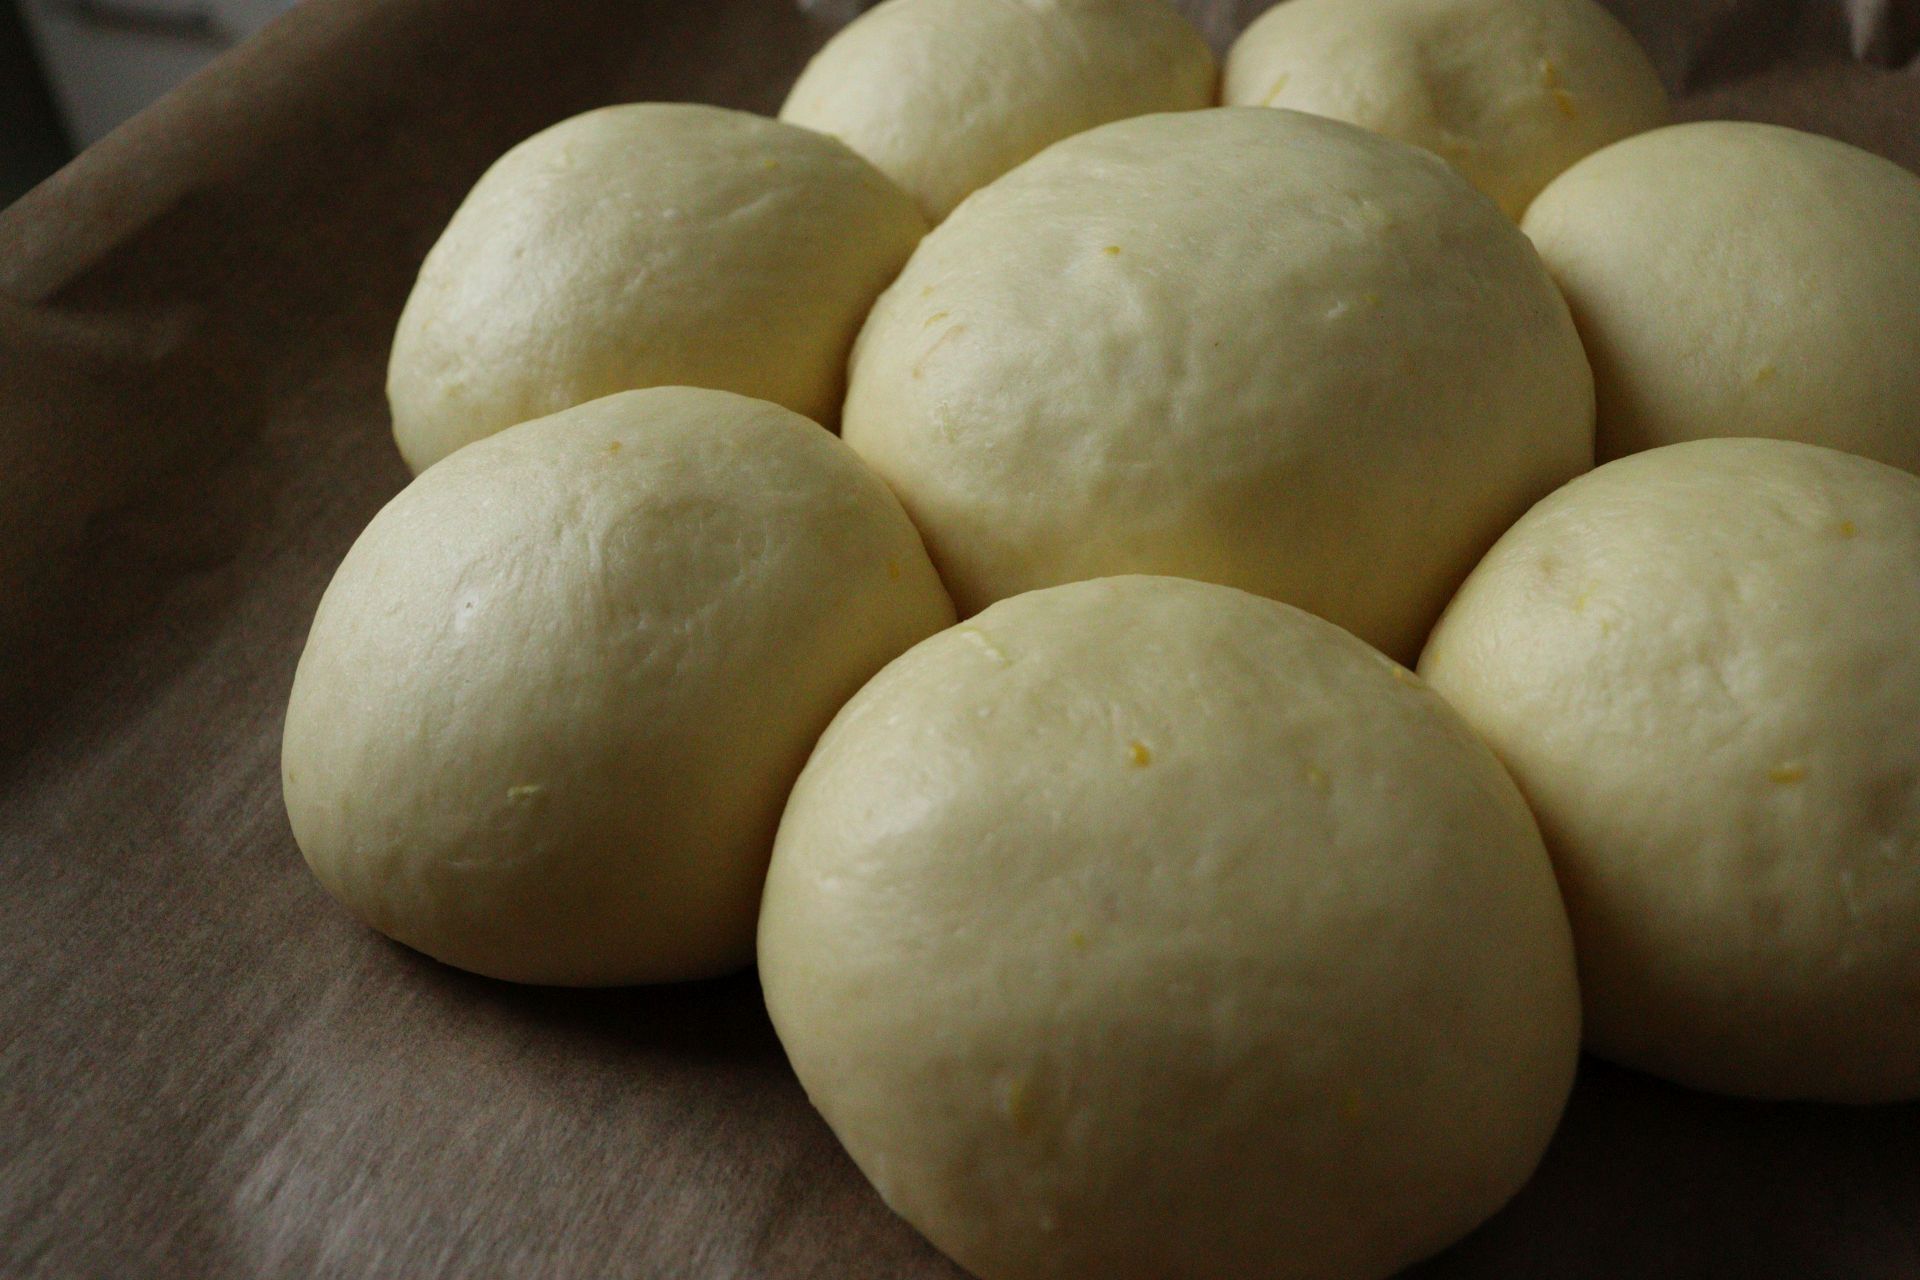 Yeast rolls shaped into a flower or a crown for Dreikönigskuchen - Three Kings' Cake, proofed and ready to be baked